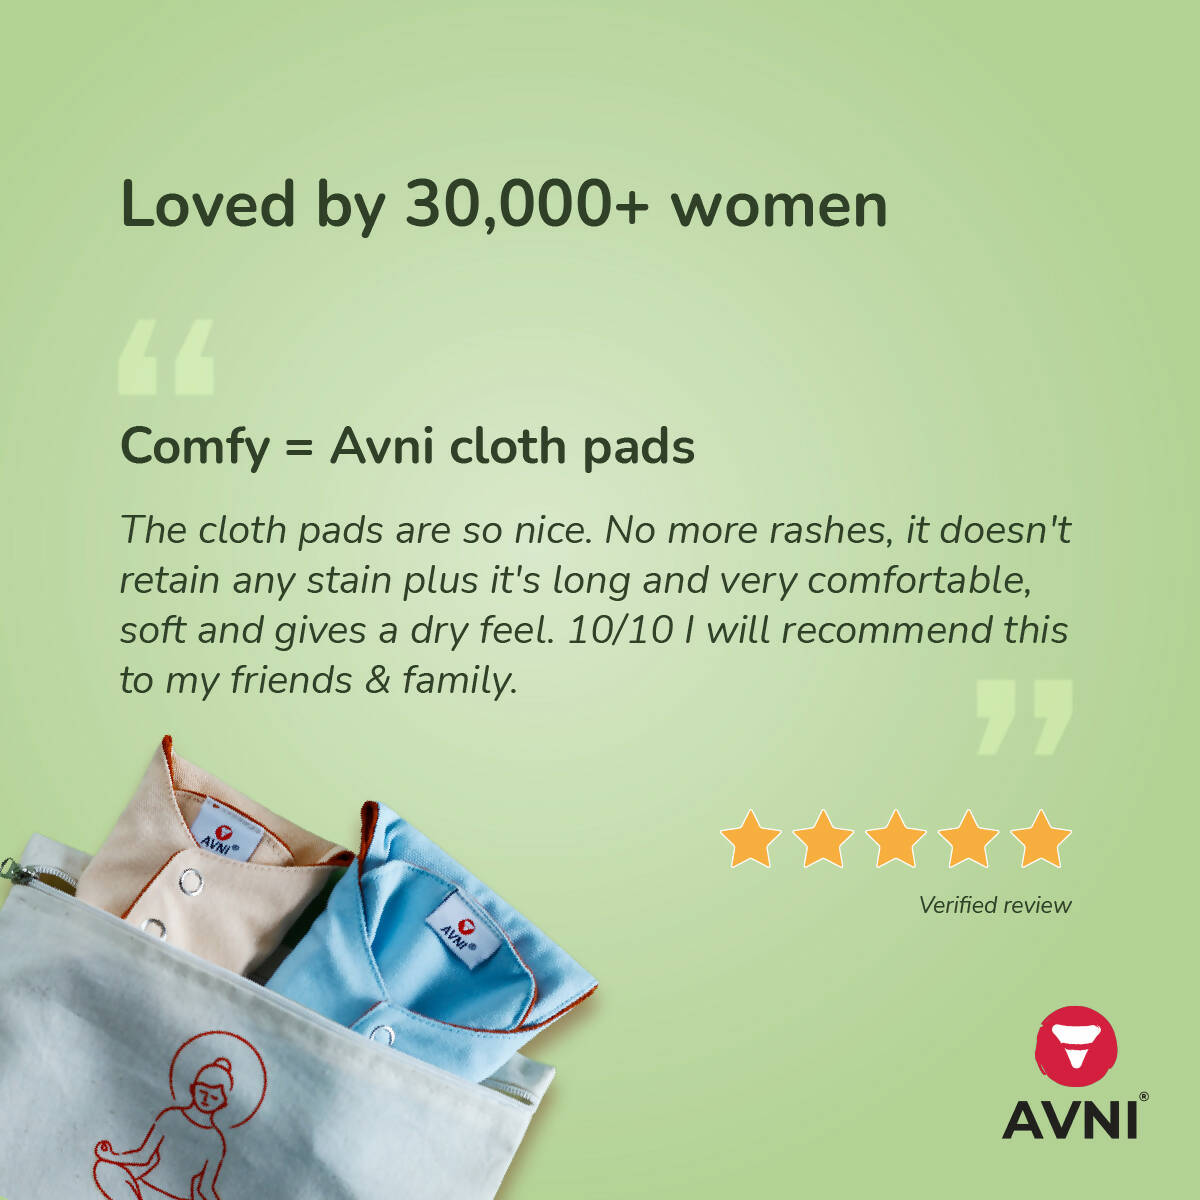 Avni Lush Certified 100% Organic Cotton Washable Cloth Pads, Regular Size (R-240MM, Pack of 4) | Antimicrobial Reusable Cloth Sanitary Pad | With Cloth Storage pouch Wemy Store